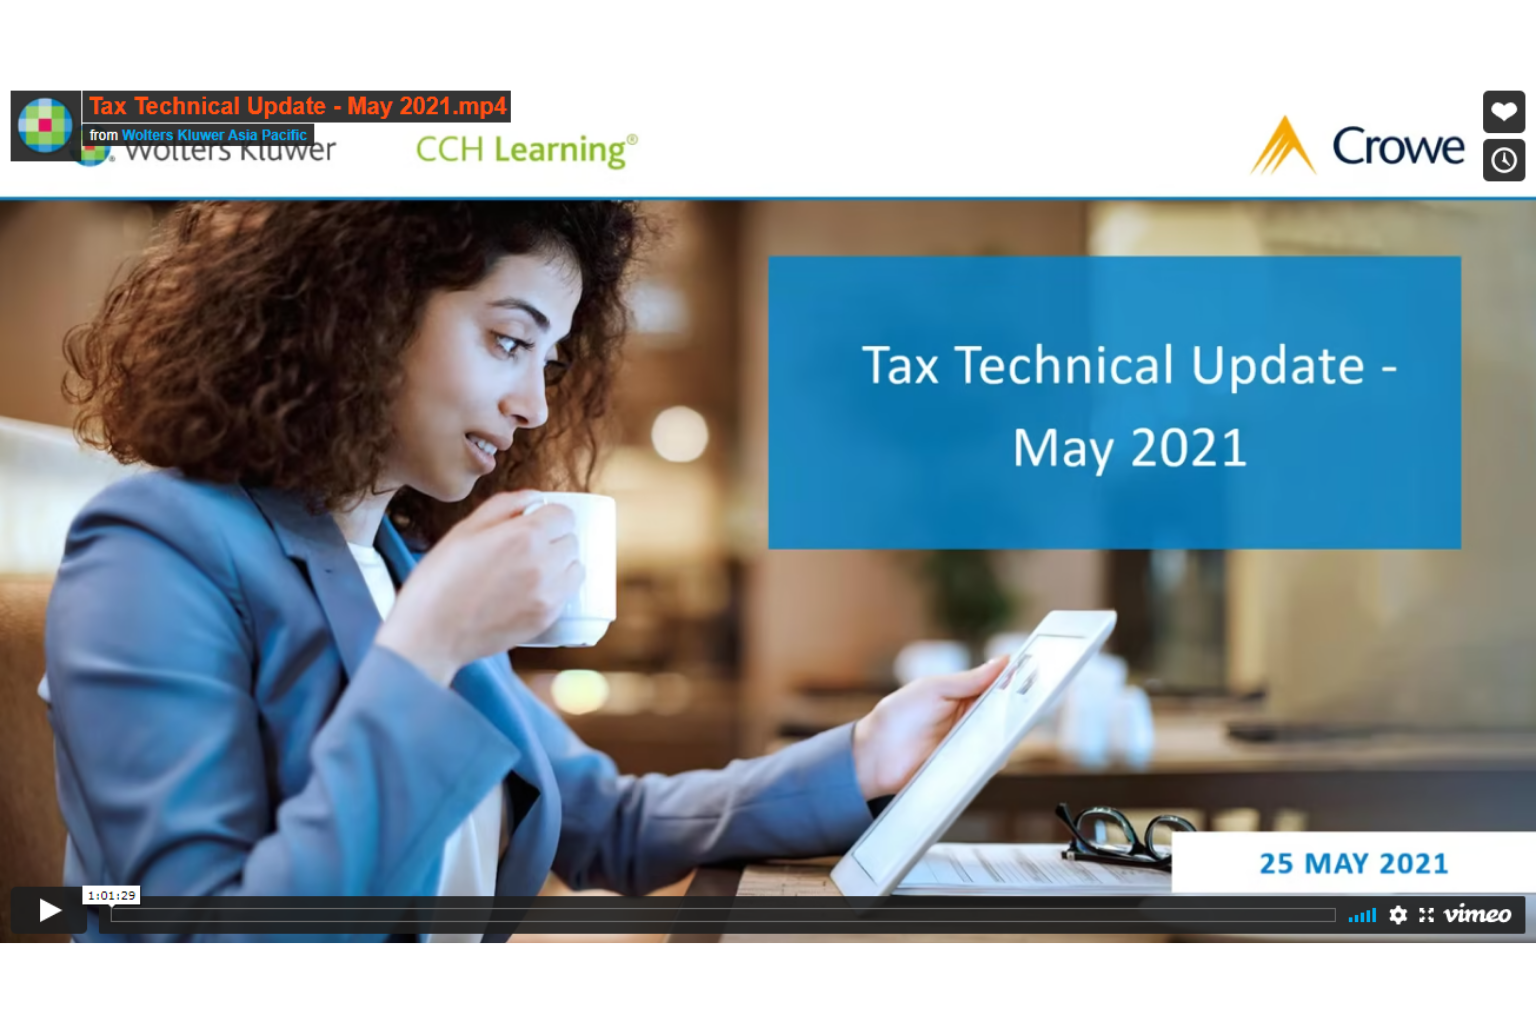 Tax Technical Update - May 2021